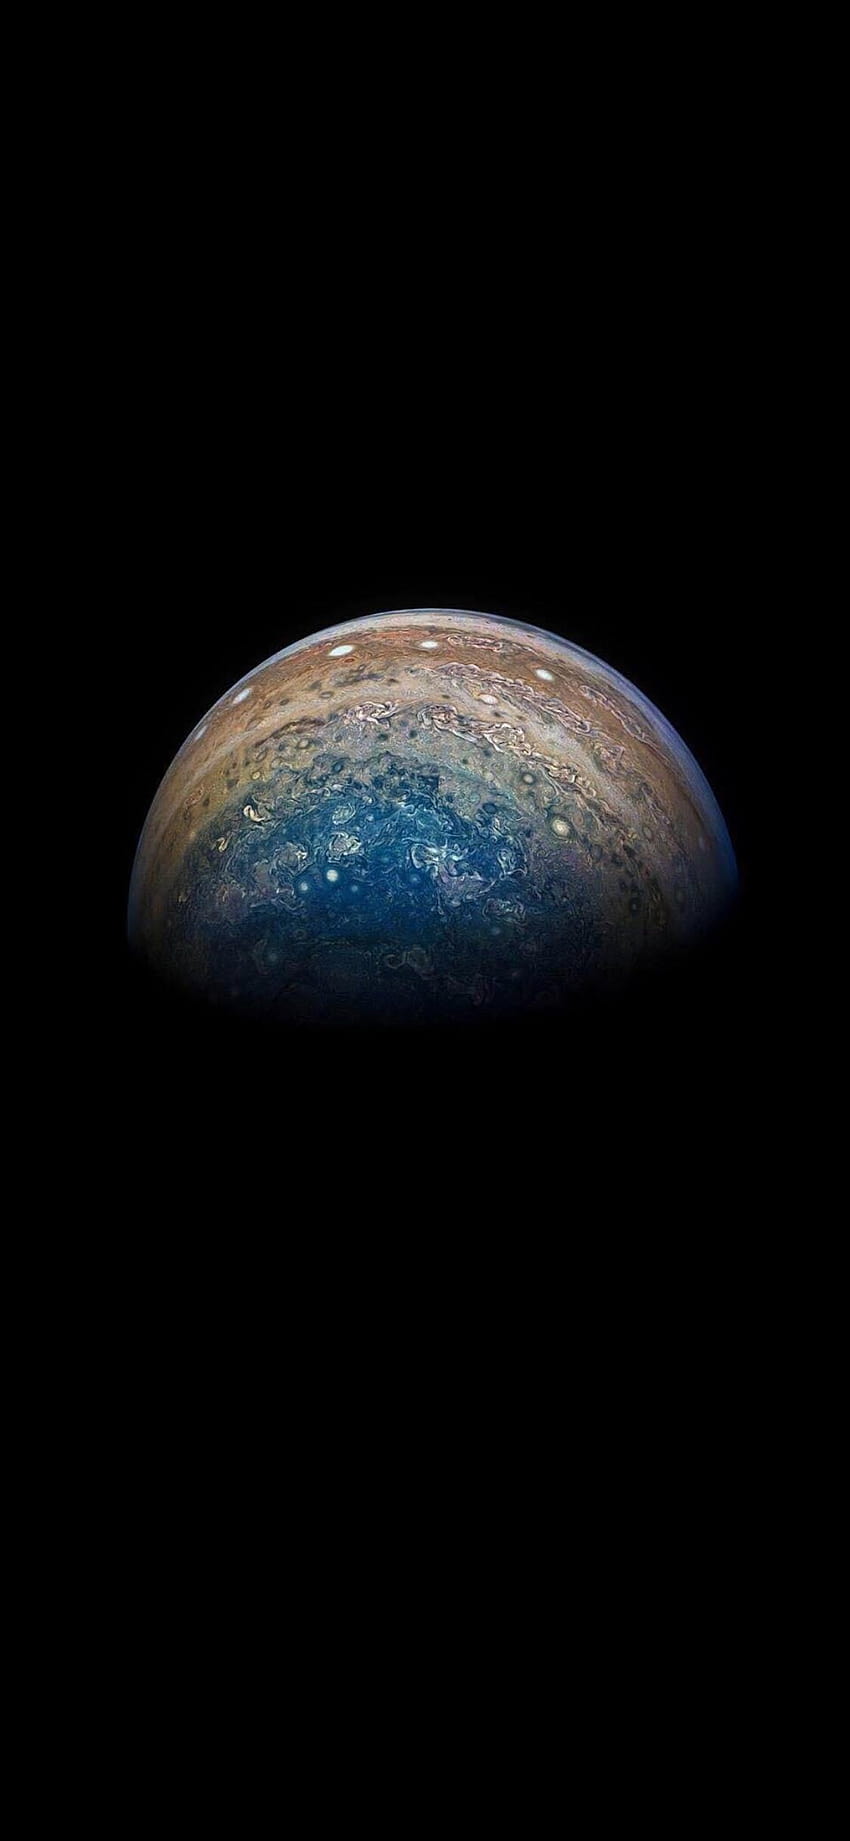 Jupiter resized for iPhone X : iphonex, iphone x planets HD phone wallpaper